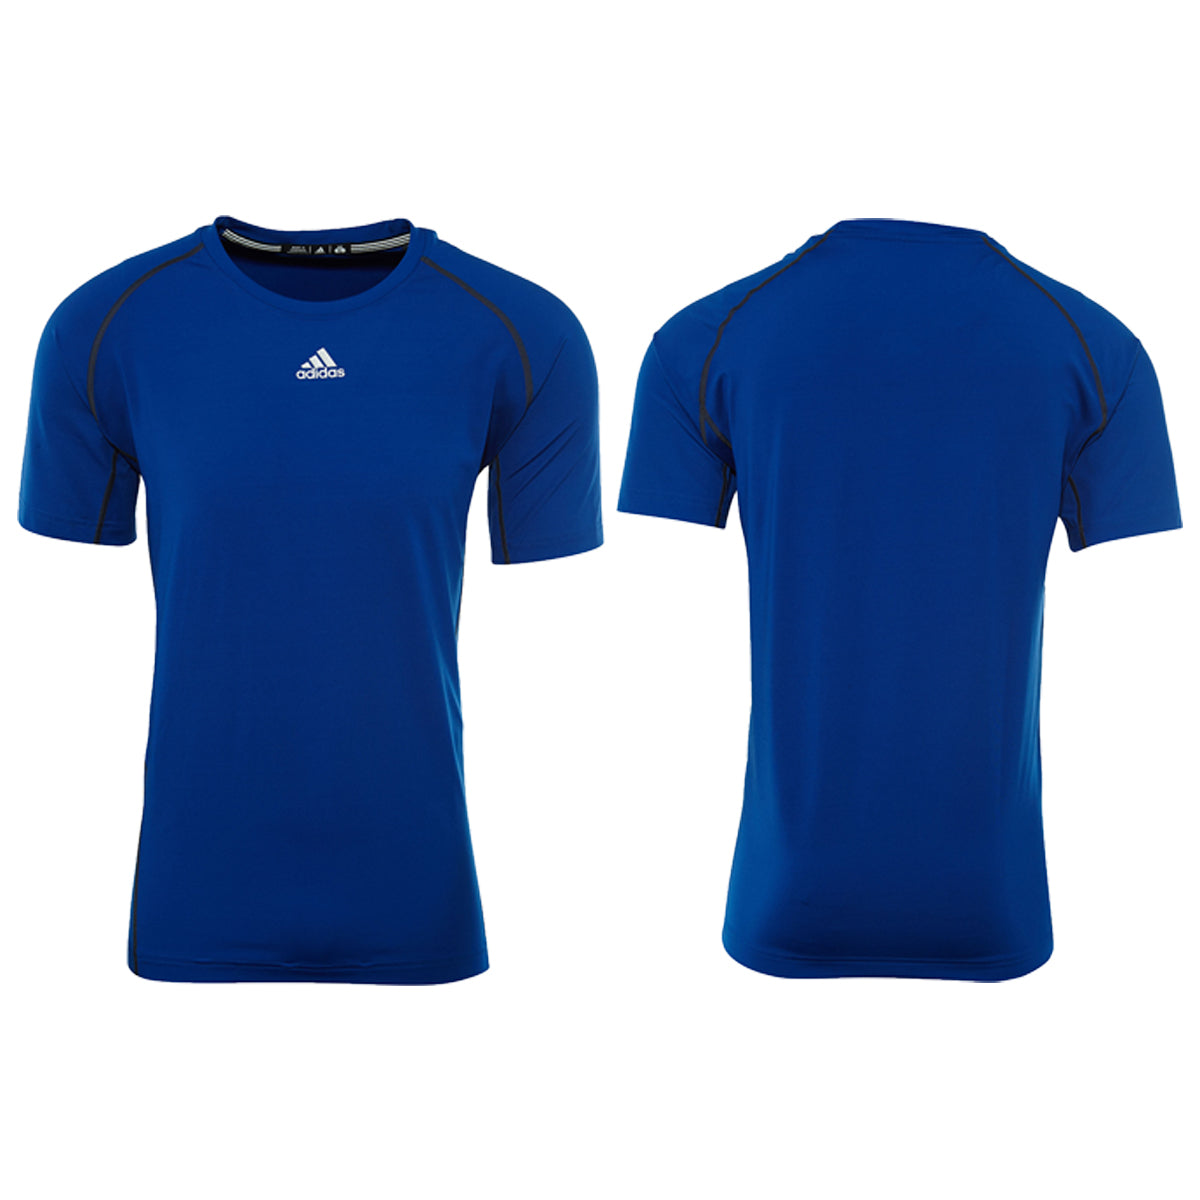 Adidas Fitted Ss Top Mens Style : Z34518